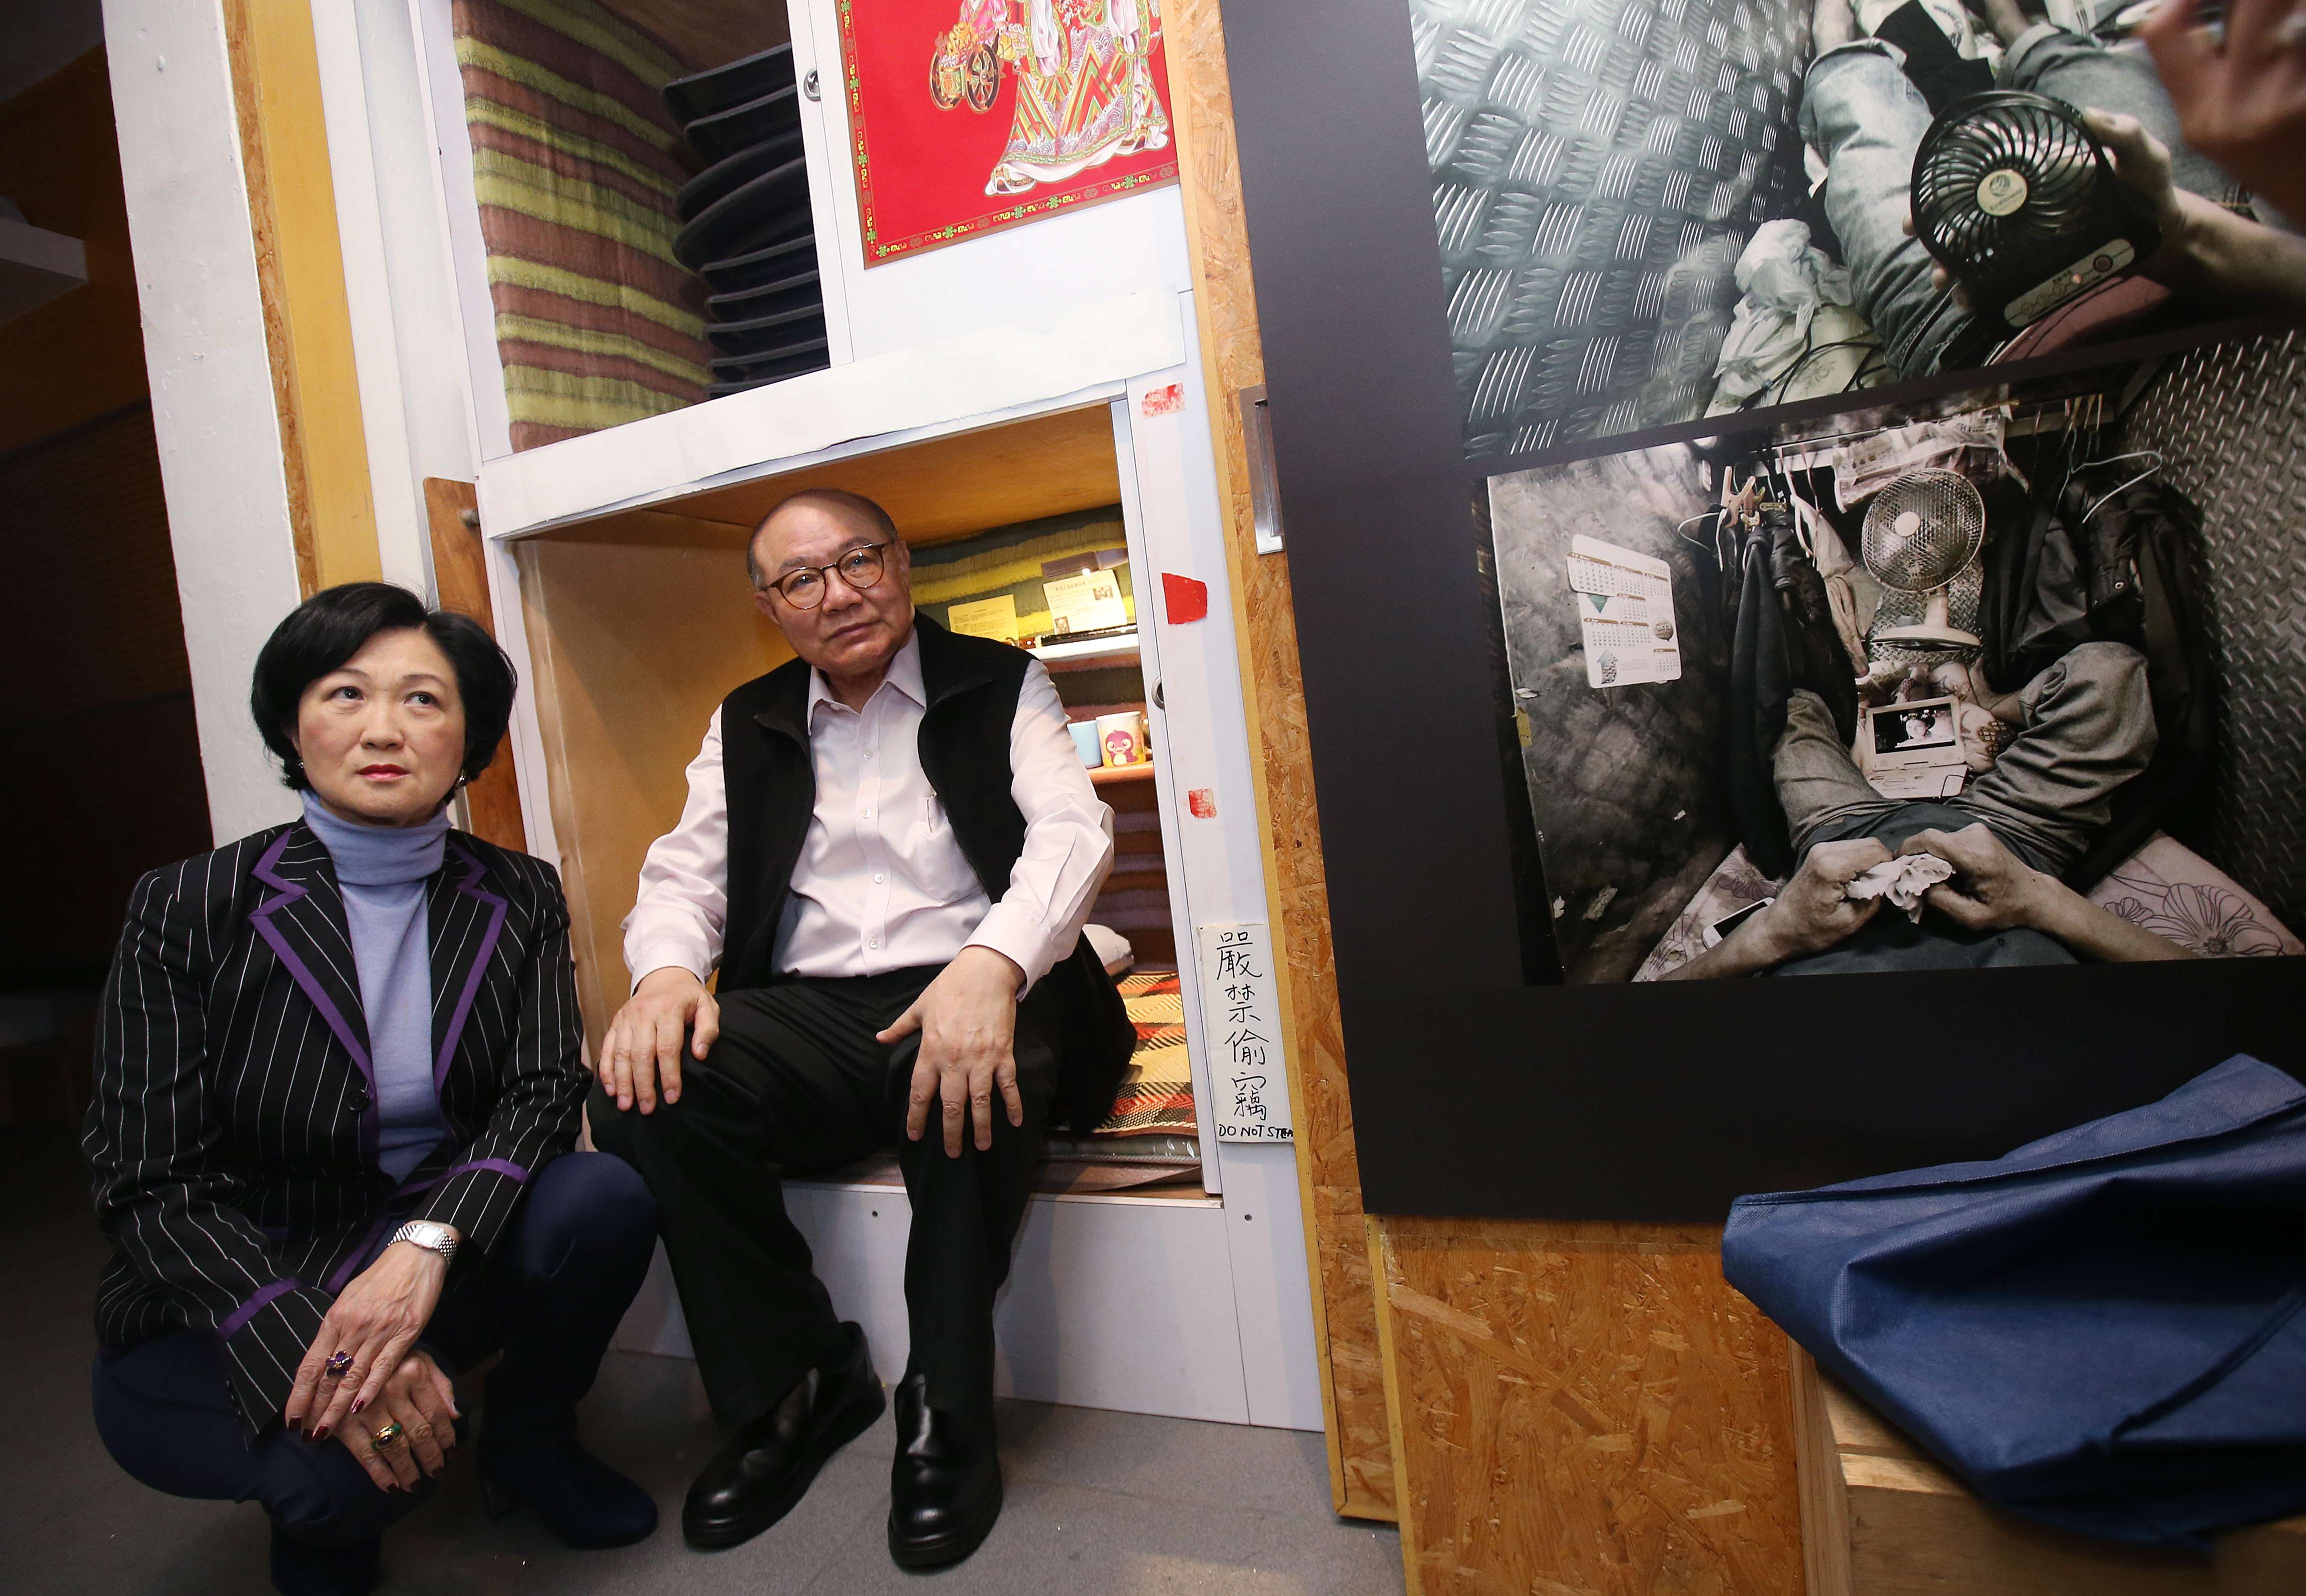 Regina Ip Lau Suk-yee (left) and Woo Kwok-hing at an earlier exhibition organised by the Society for Community Organisation in Sham Shui Po, highlighting the appalling living conditions of some locals. Photo: David Wong